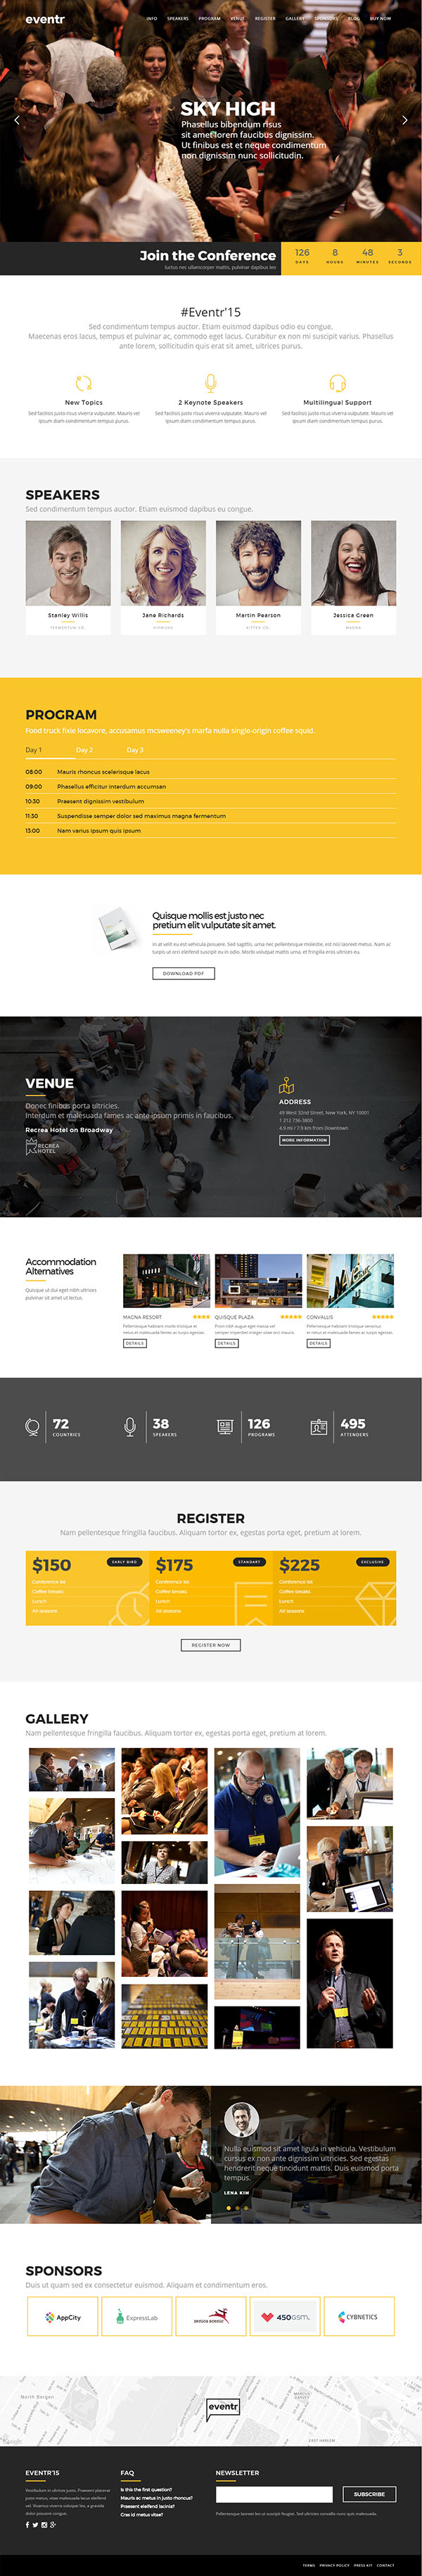 Eventr - One Page Event WordPress Theme